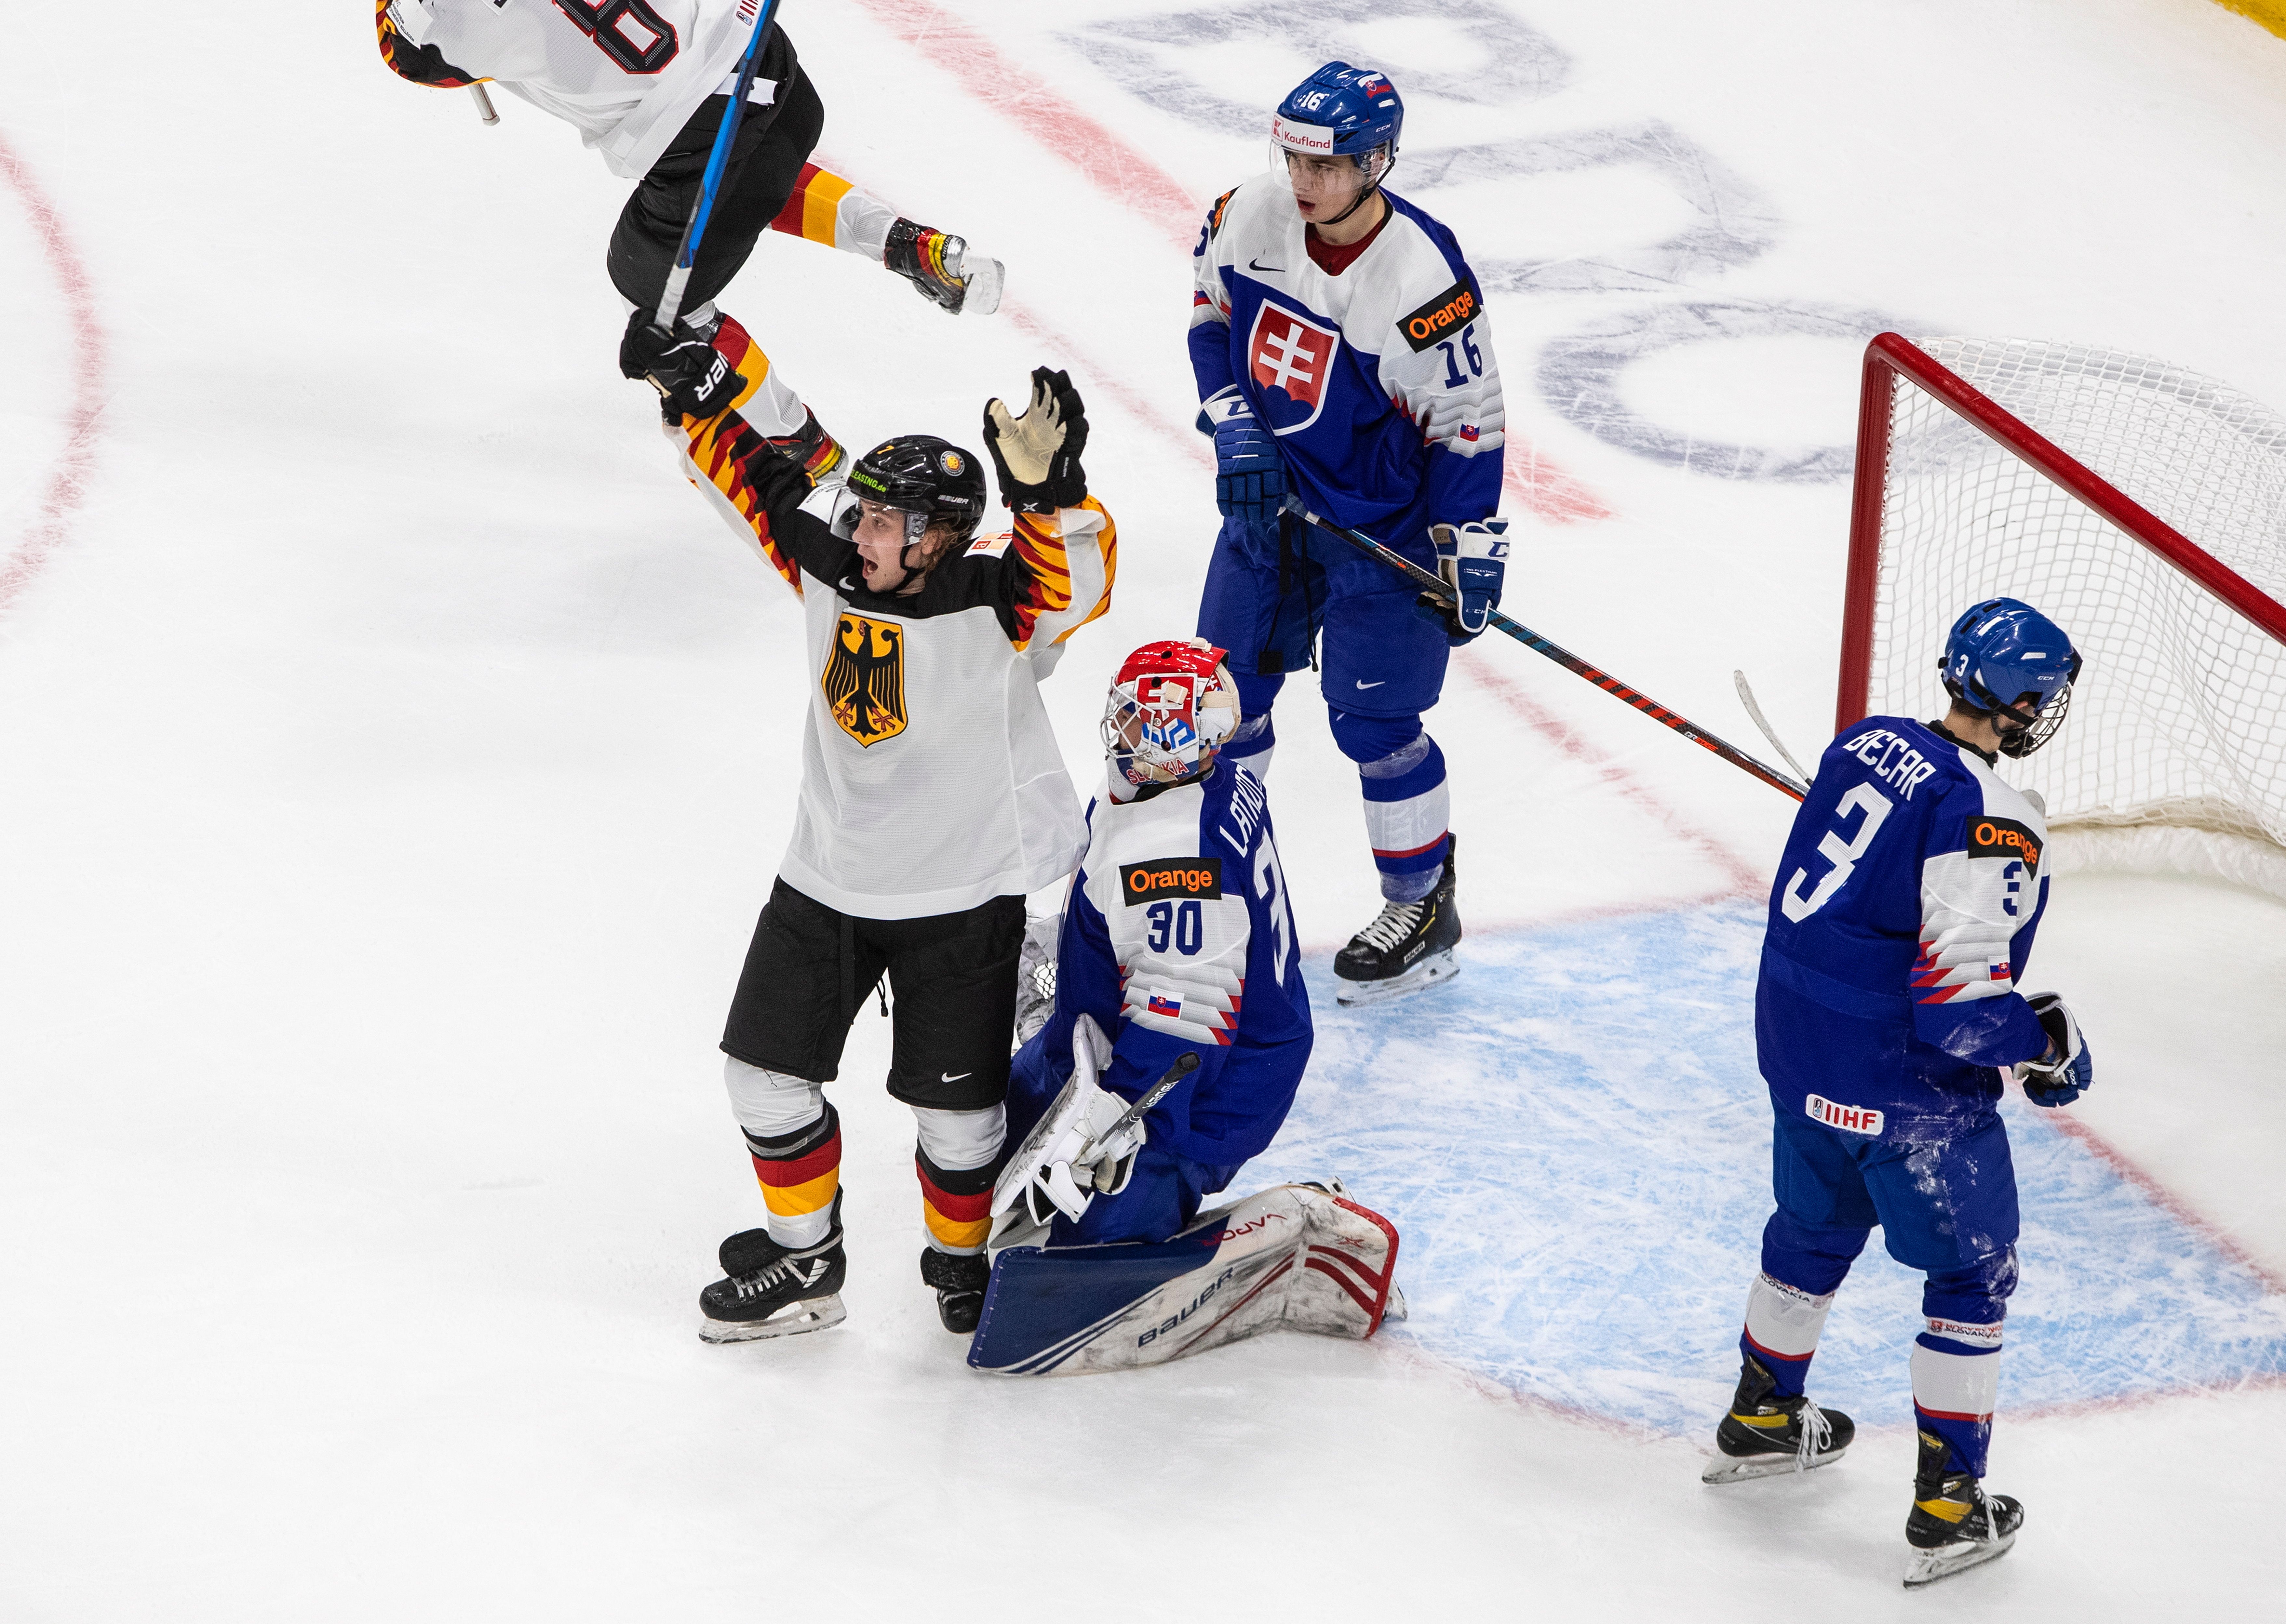 Germany edges Slovakia 4-3 in OT at world juniors The Seattle Times